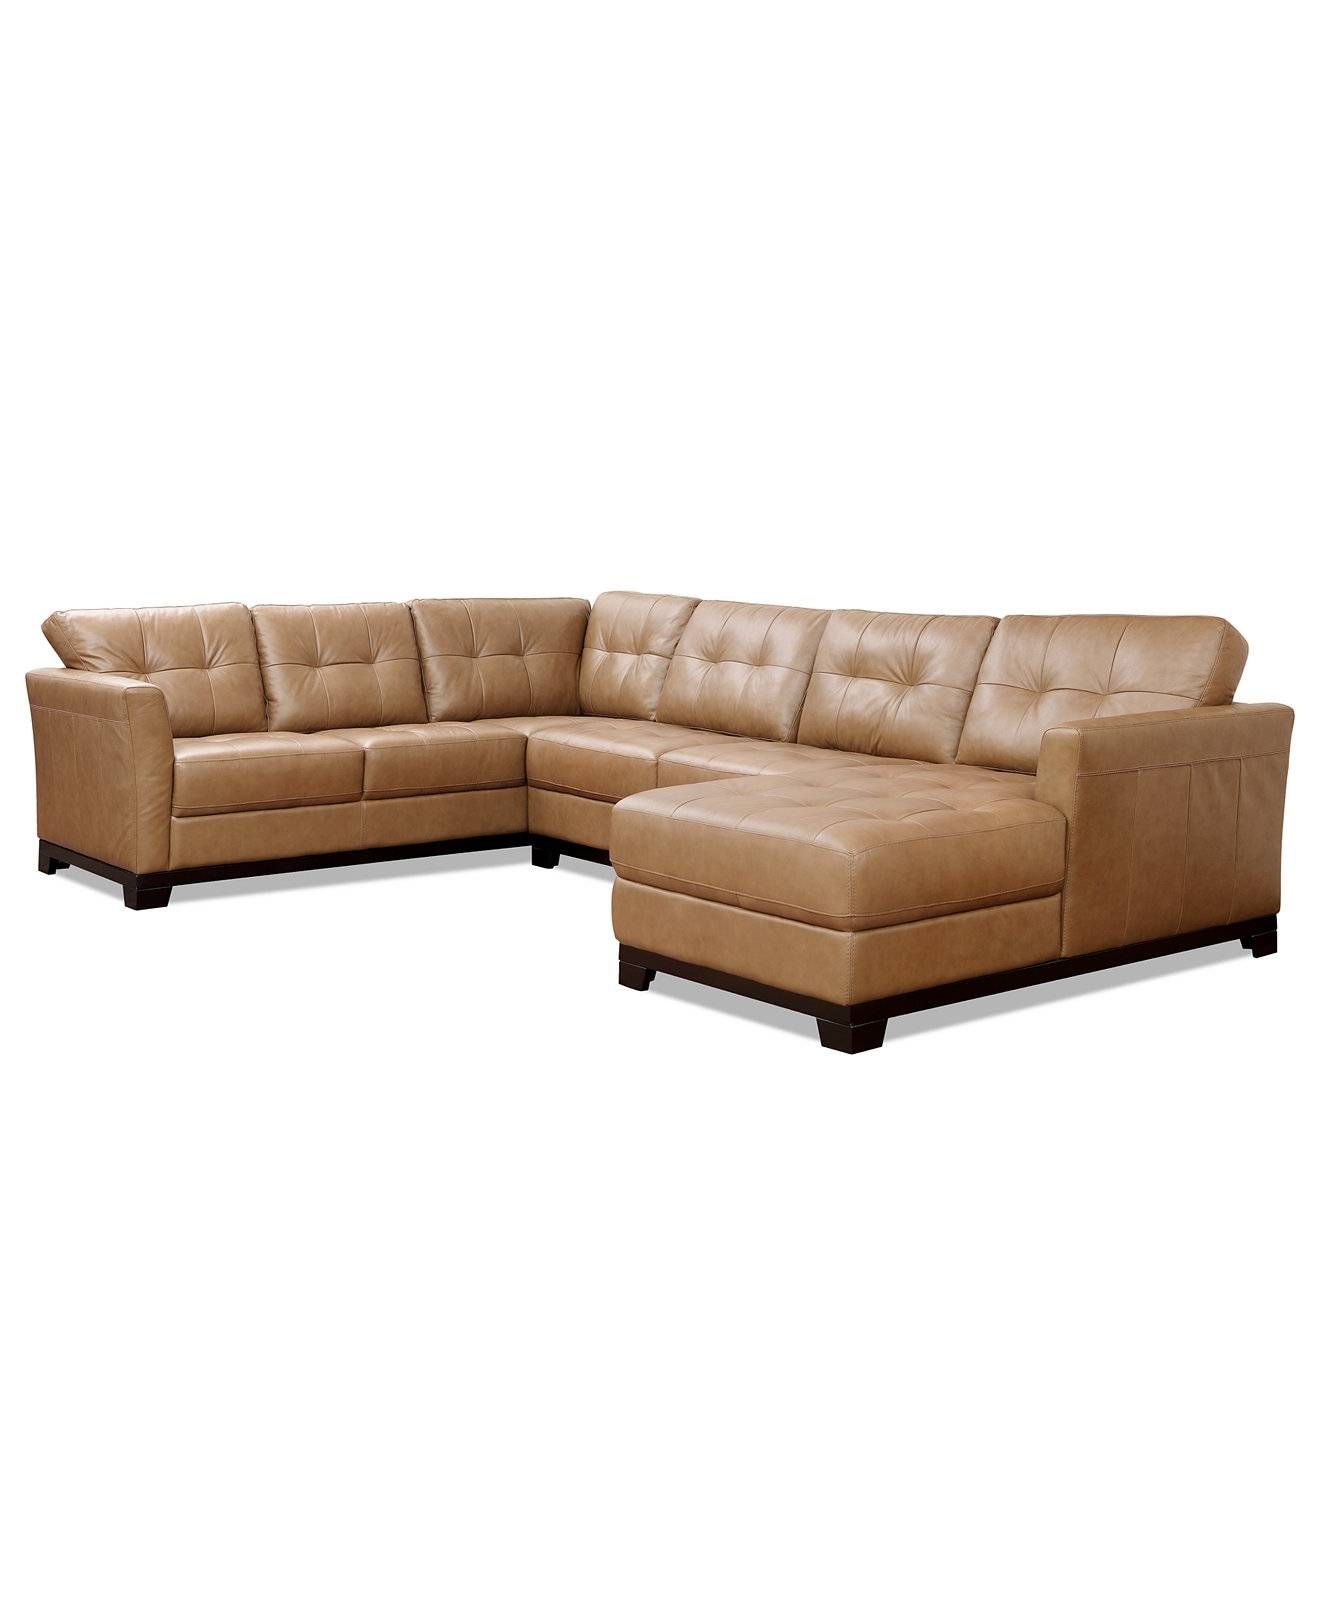 Sectional Sofas Macys 41 With Sectional Sofas Macys | Jinanhongyu Within Macys Leather Sectional Sofa (View 3 of 25)